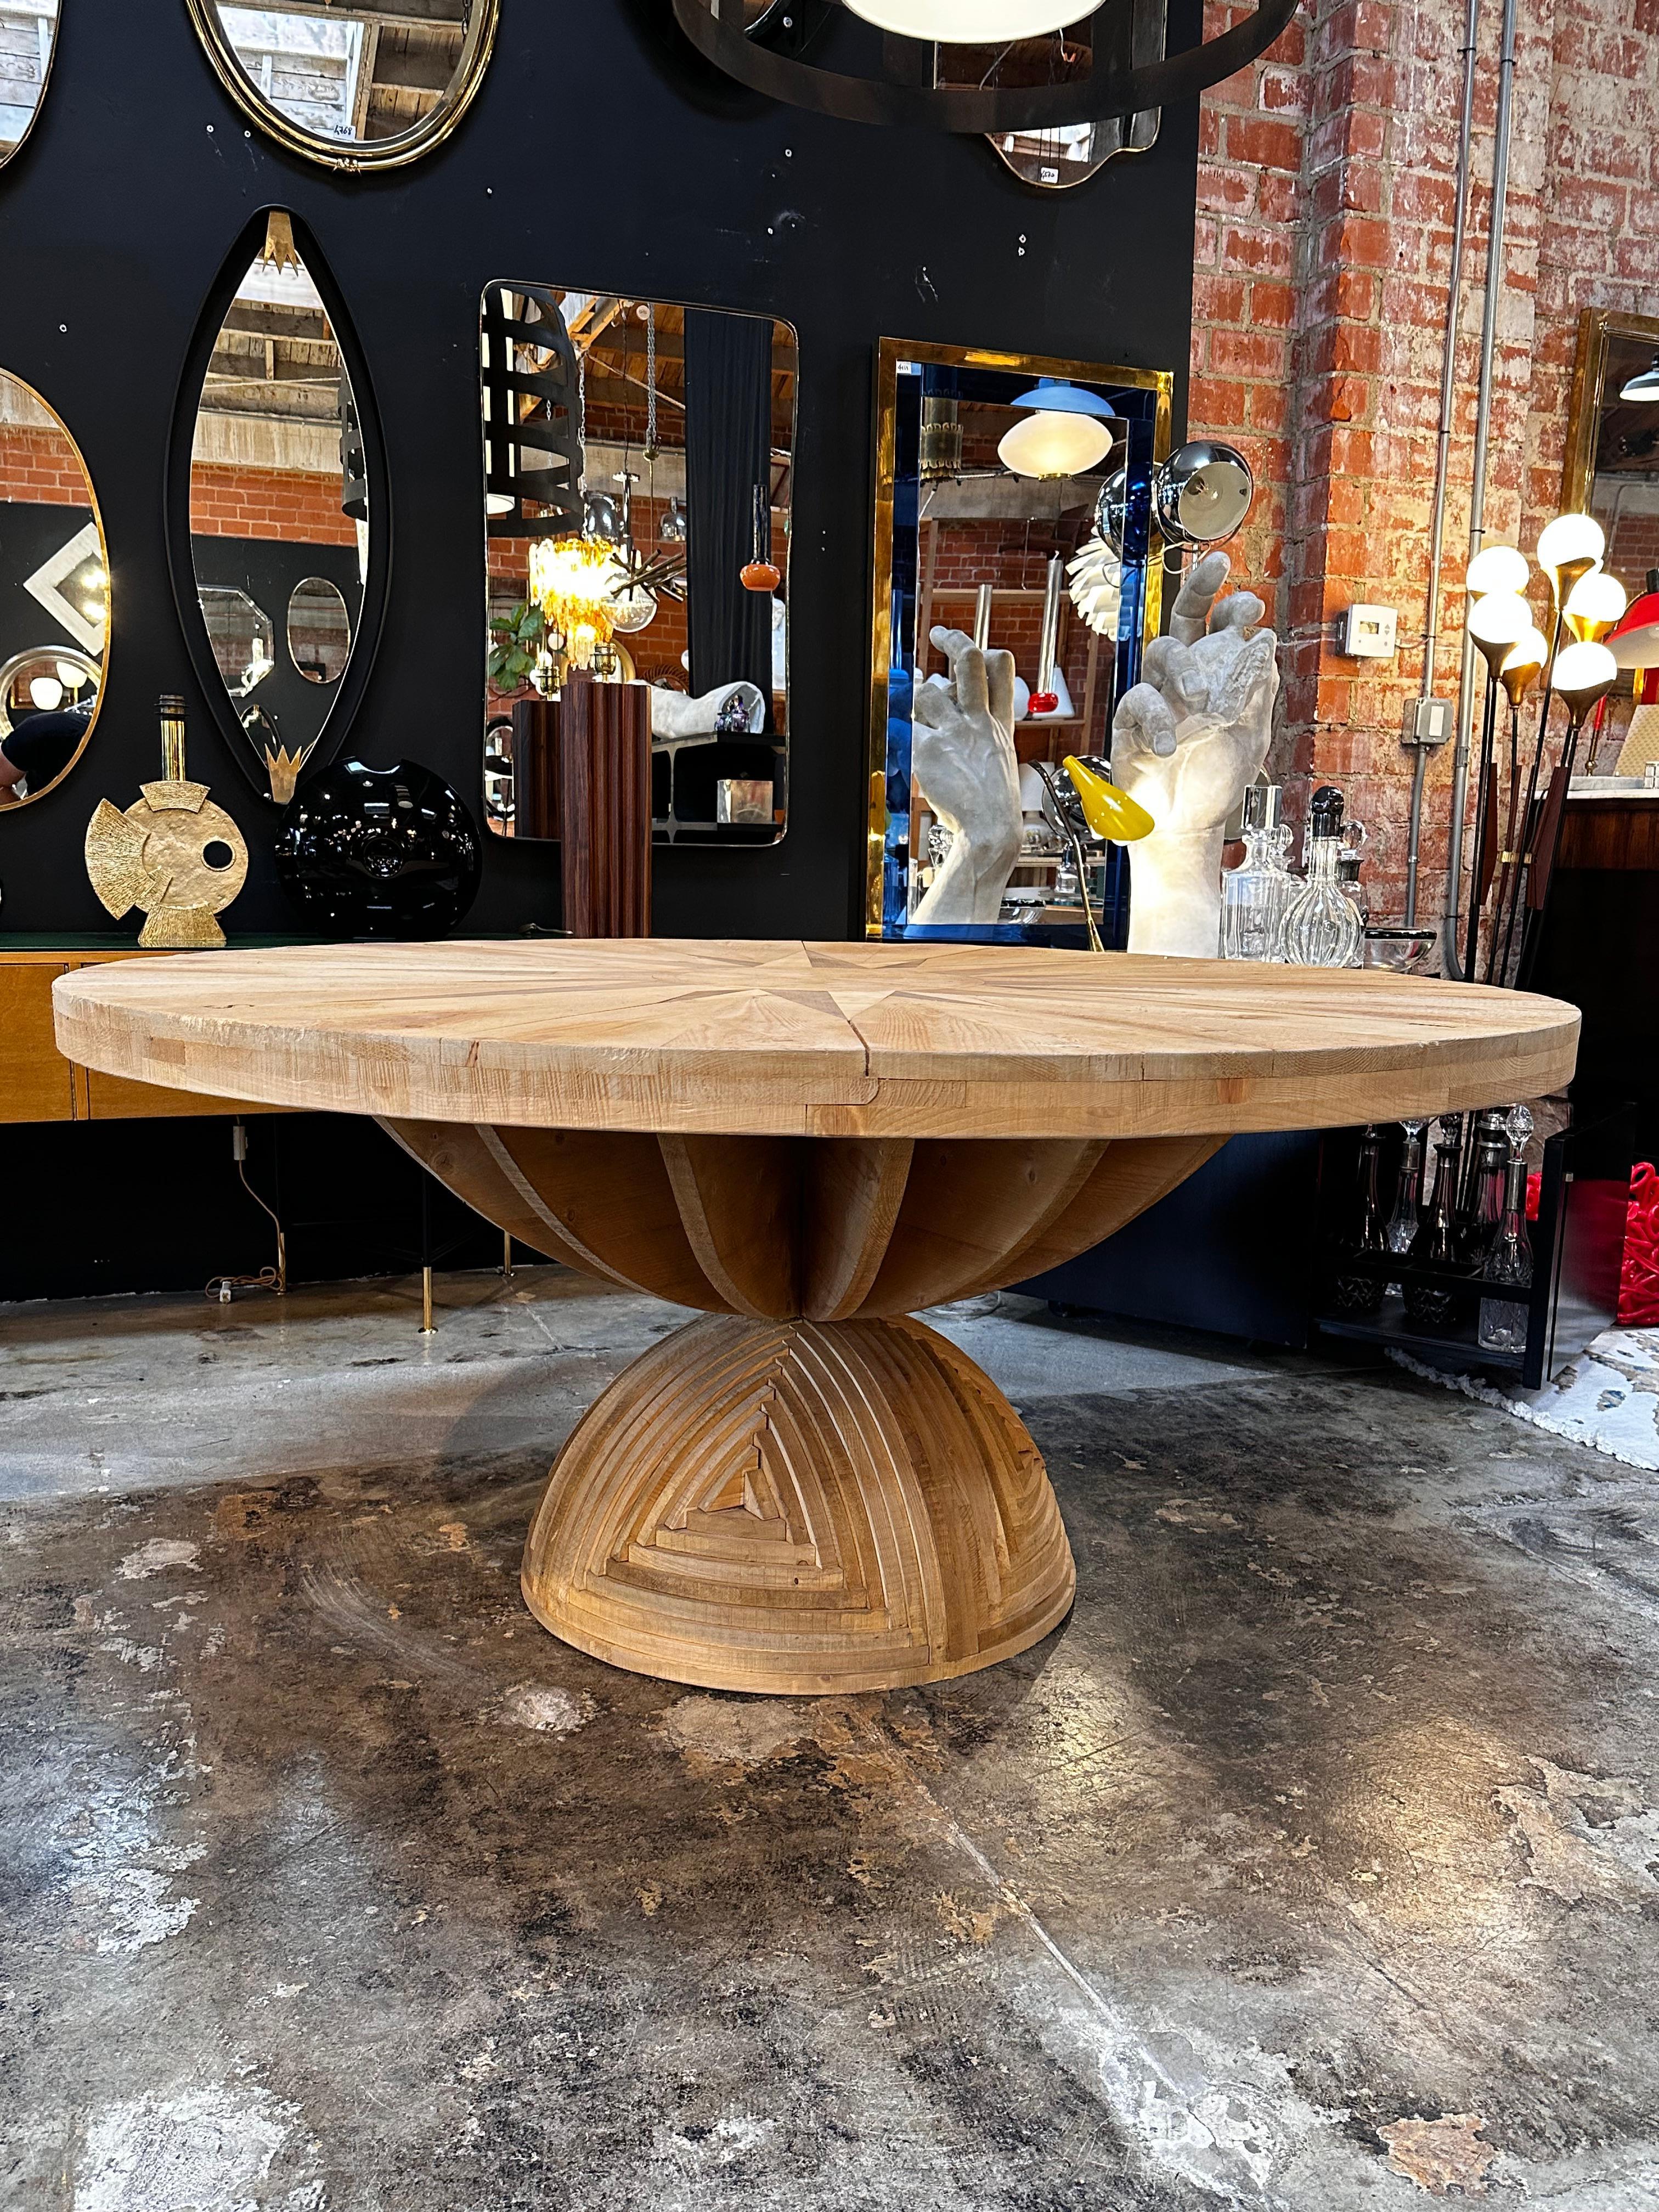 The 1st EDITION Large Rosa dei Venti table, designed by the renowned artist Mario Ceroli in the 1970s and crafted by Poltronova, is a truly remarkable piece of art and furniture. This exquisite table is characterized by its exceptional craftsmanship